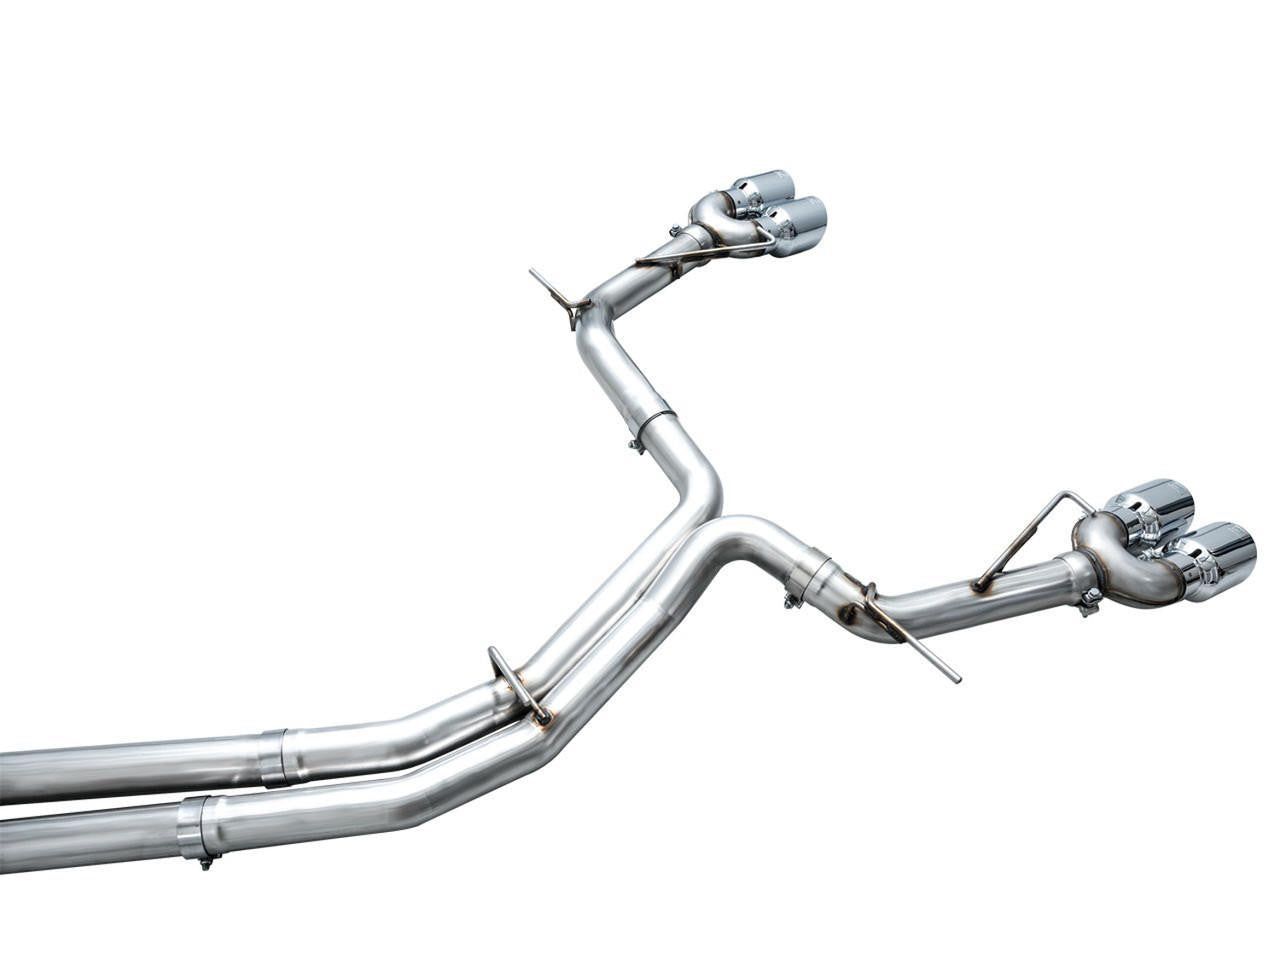 AWE Tuning AWE Track Edition Exhaust for Audi C8 S6/S7 - Chrome Silver Tips 3020-42101 